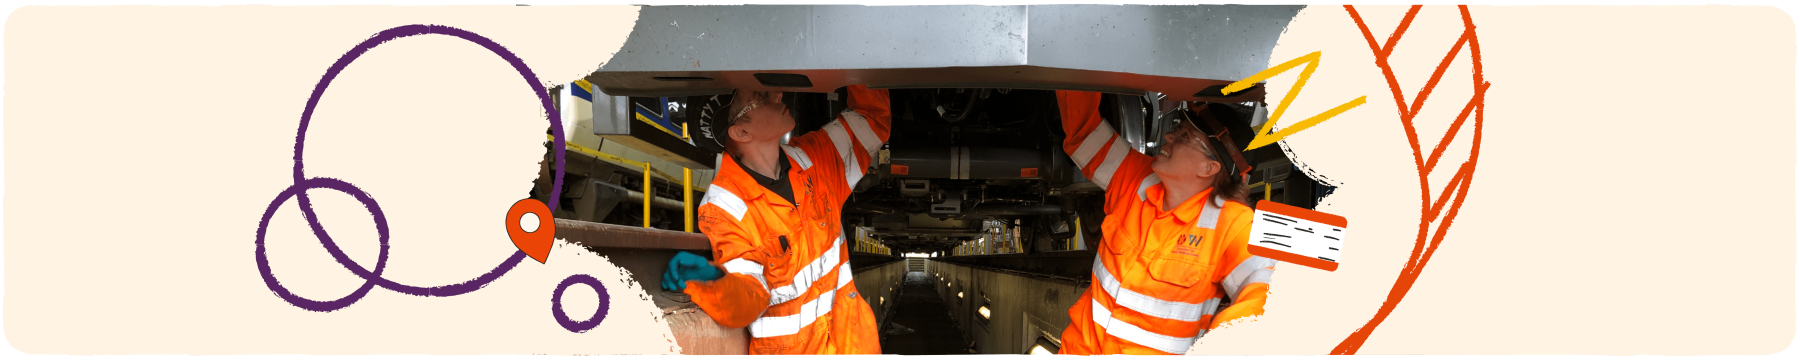 Two apprentices working underneath a train